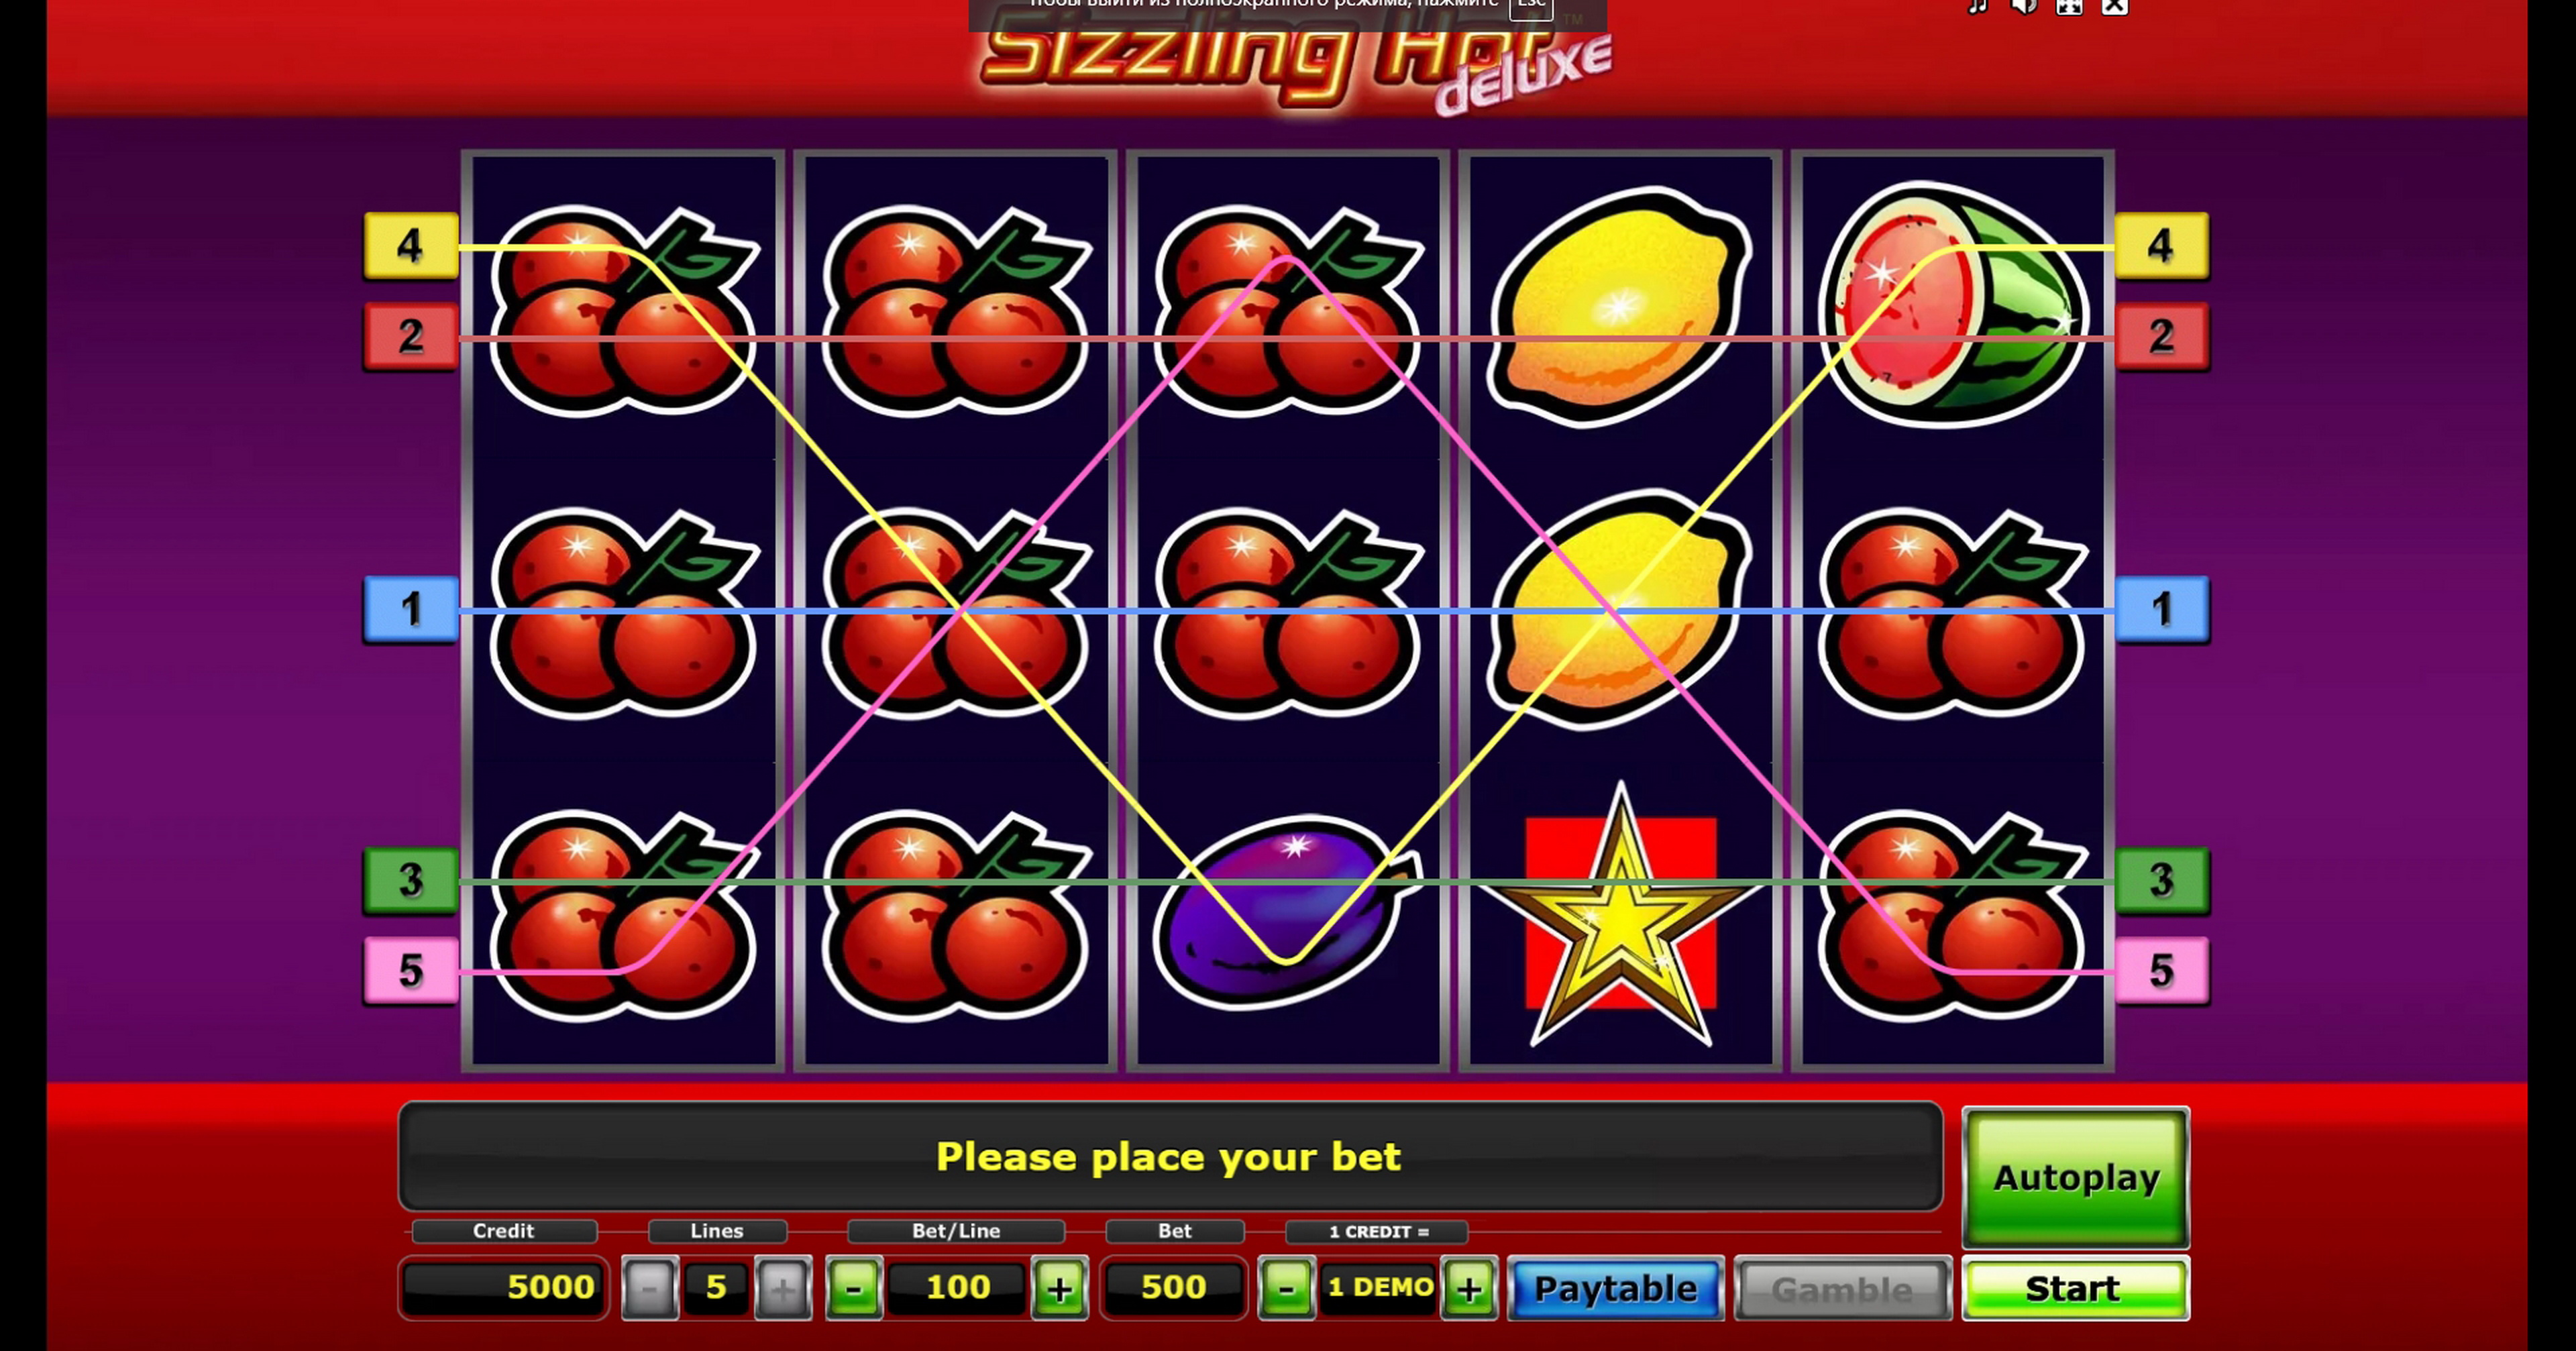 Sizzling Hot Free Game Play